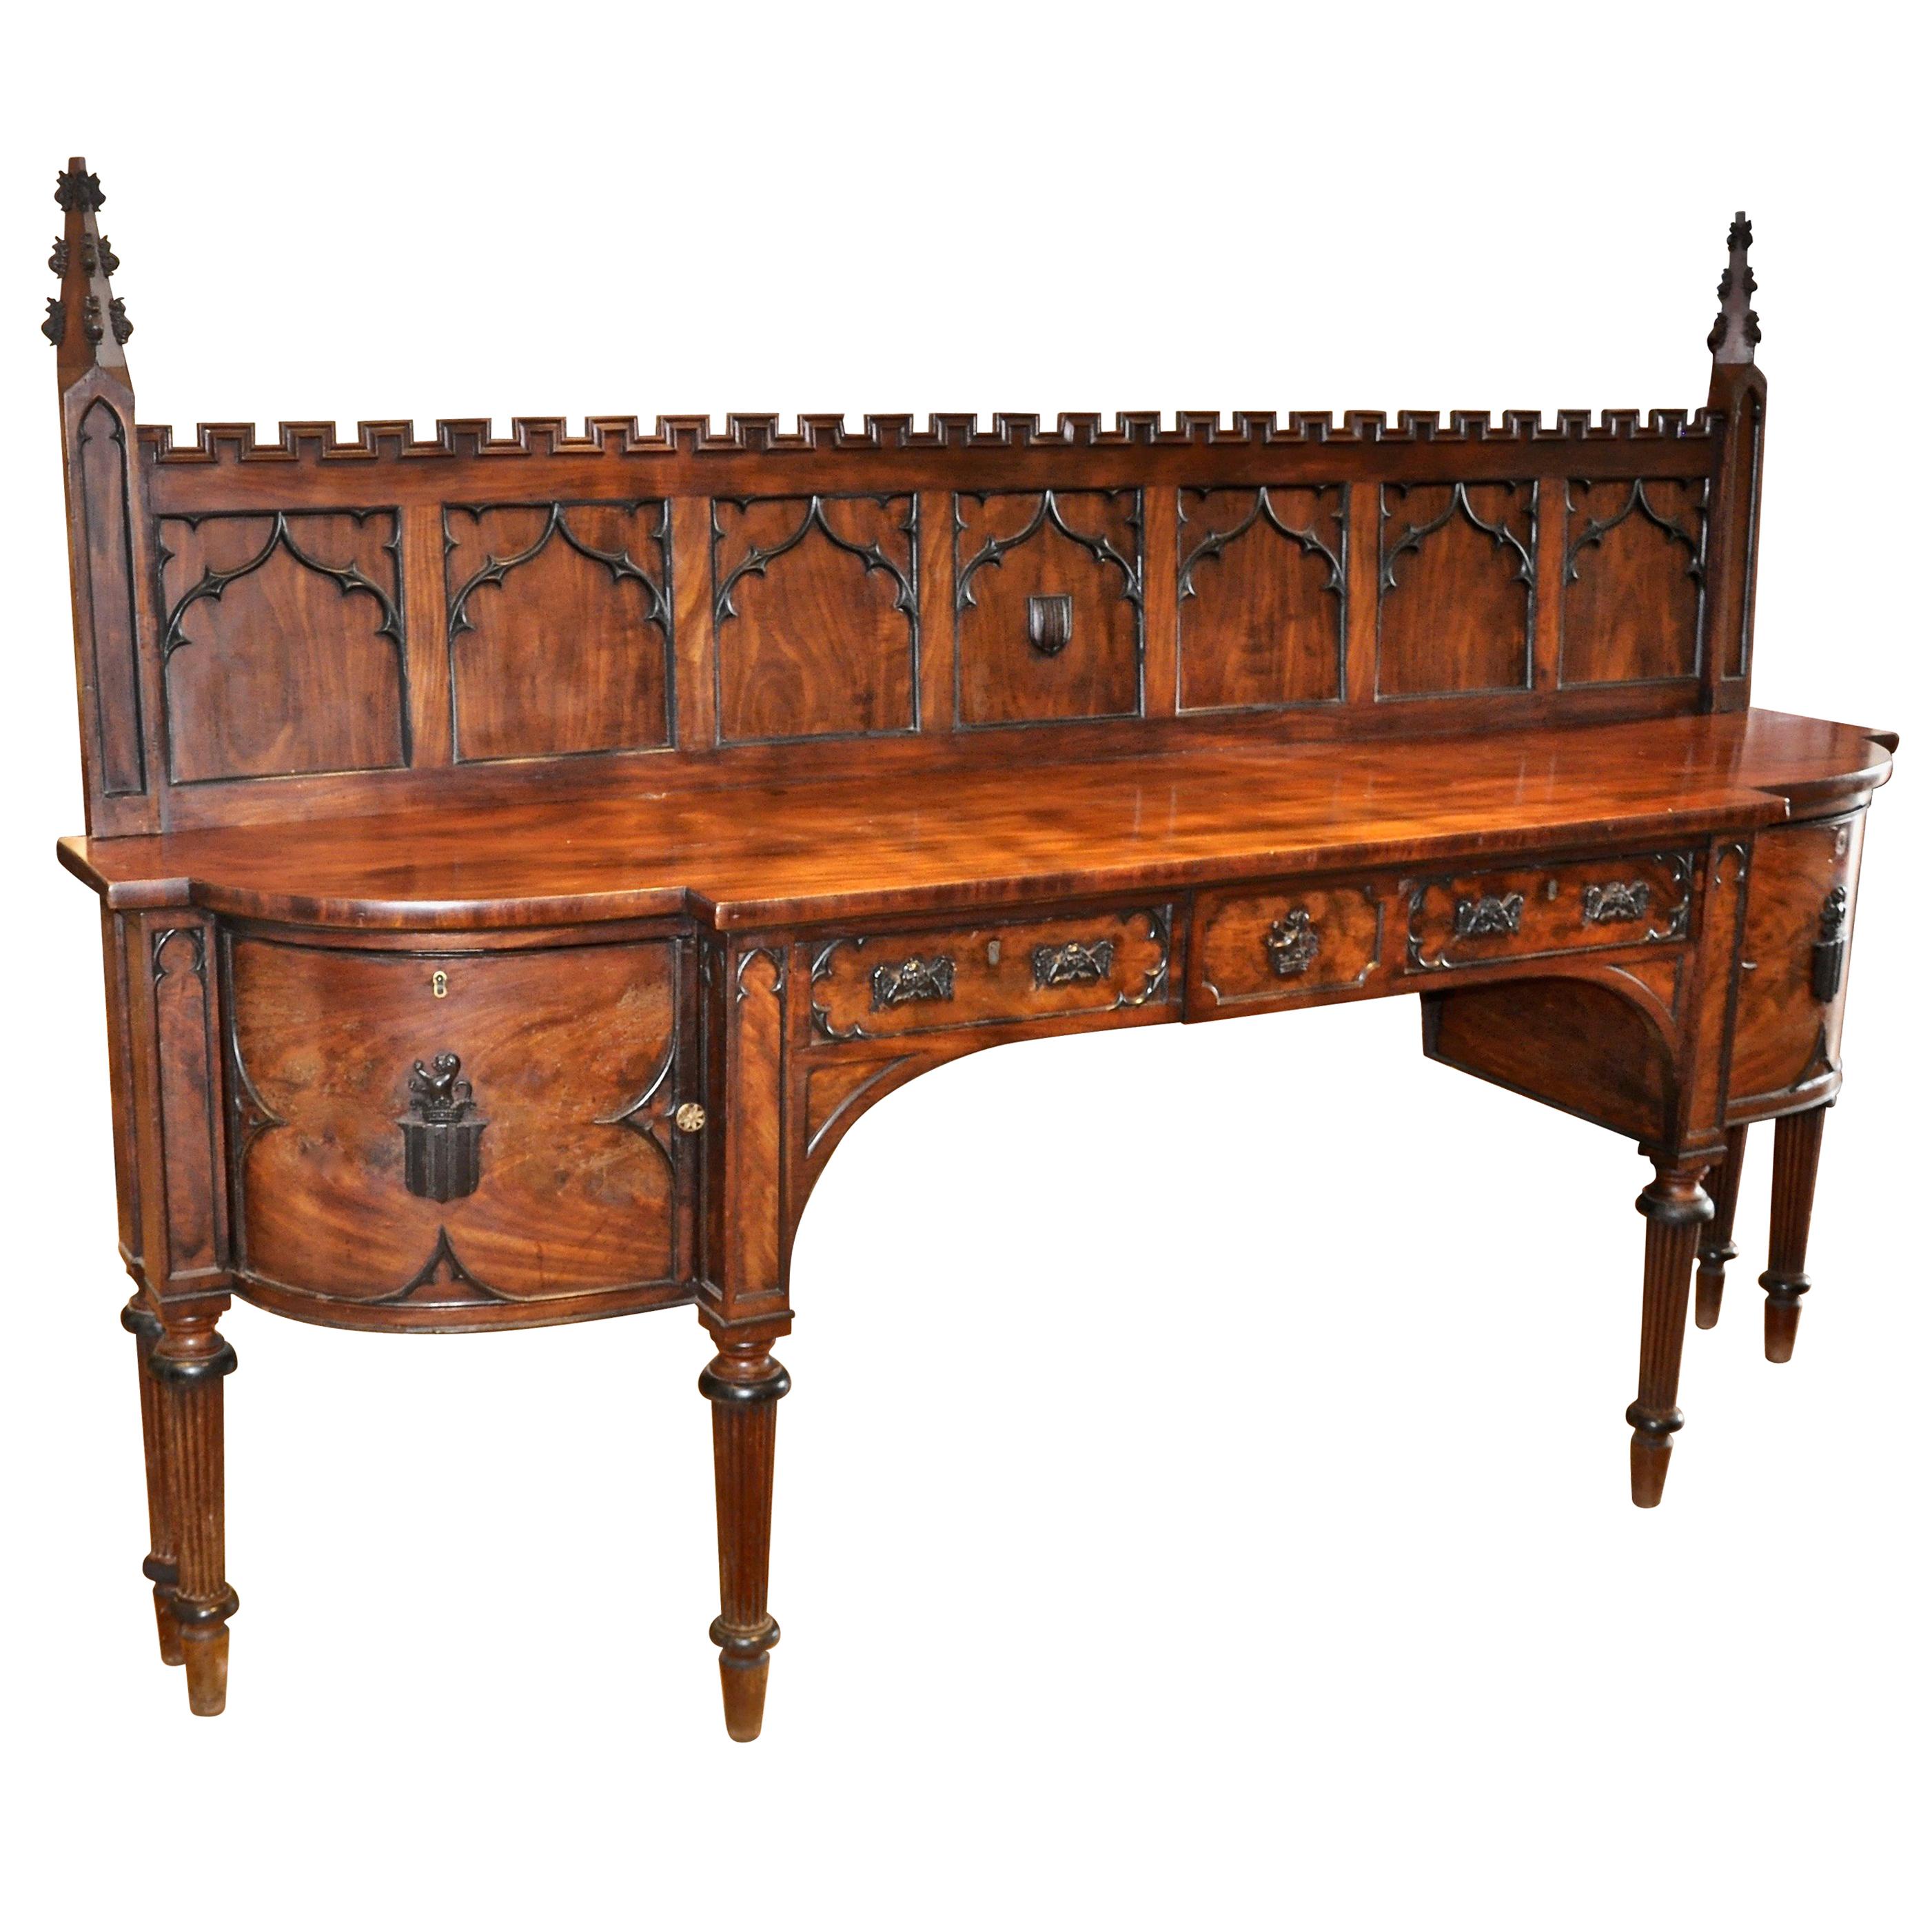 Period English George III Sideboard in Gothic Taste Gillows of London Attributed